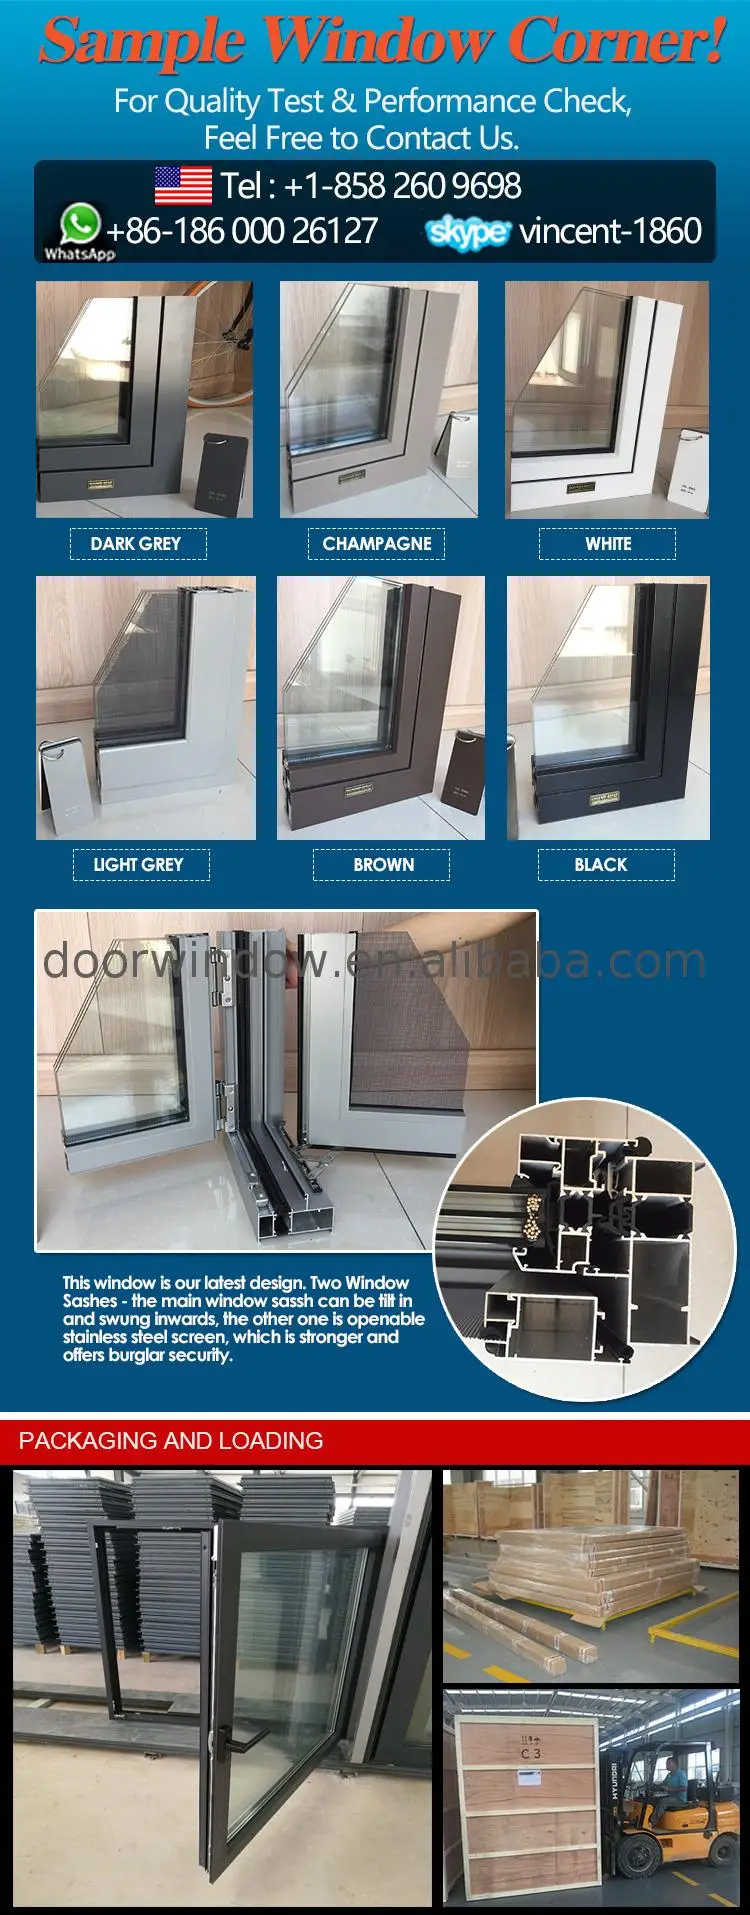 Casement windows and doors with asia style as1288 sgs certificate american standard